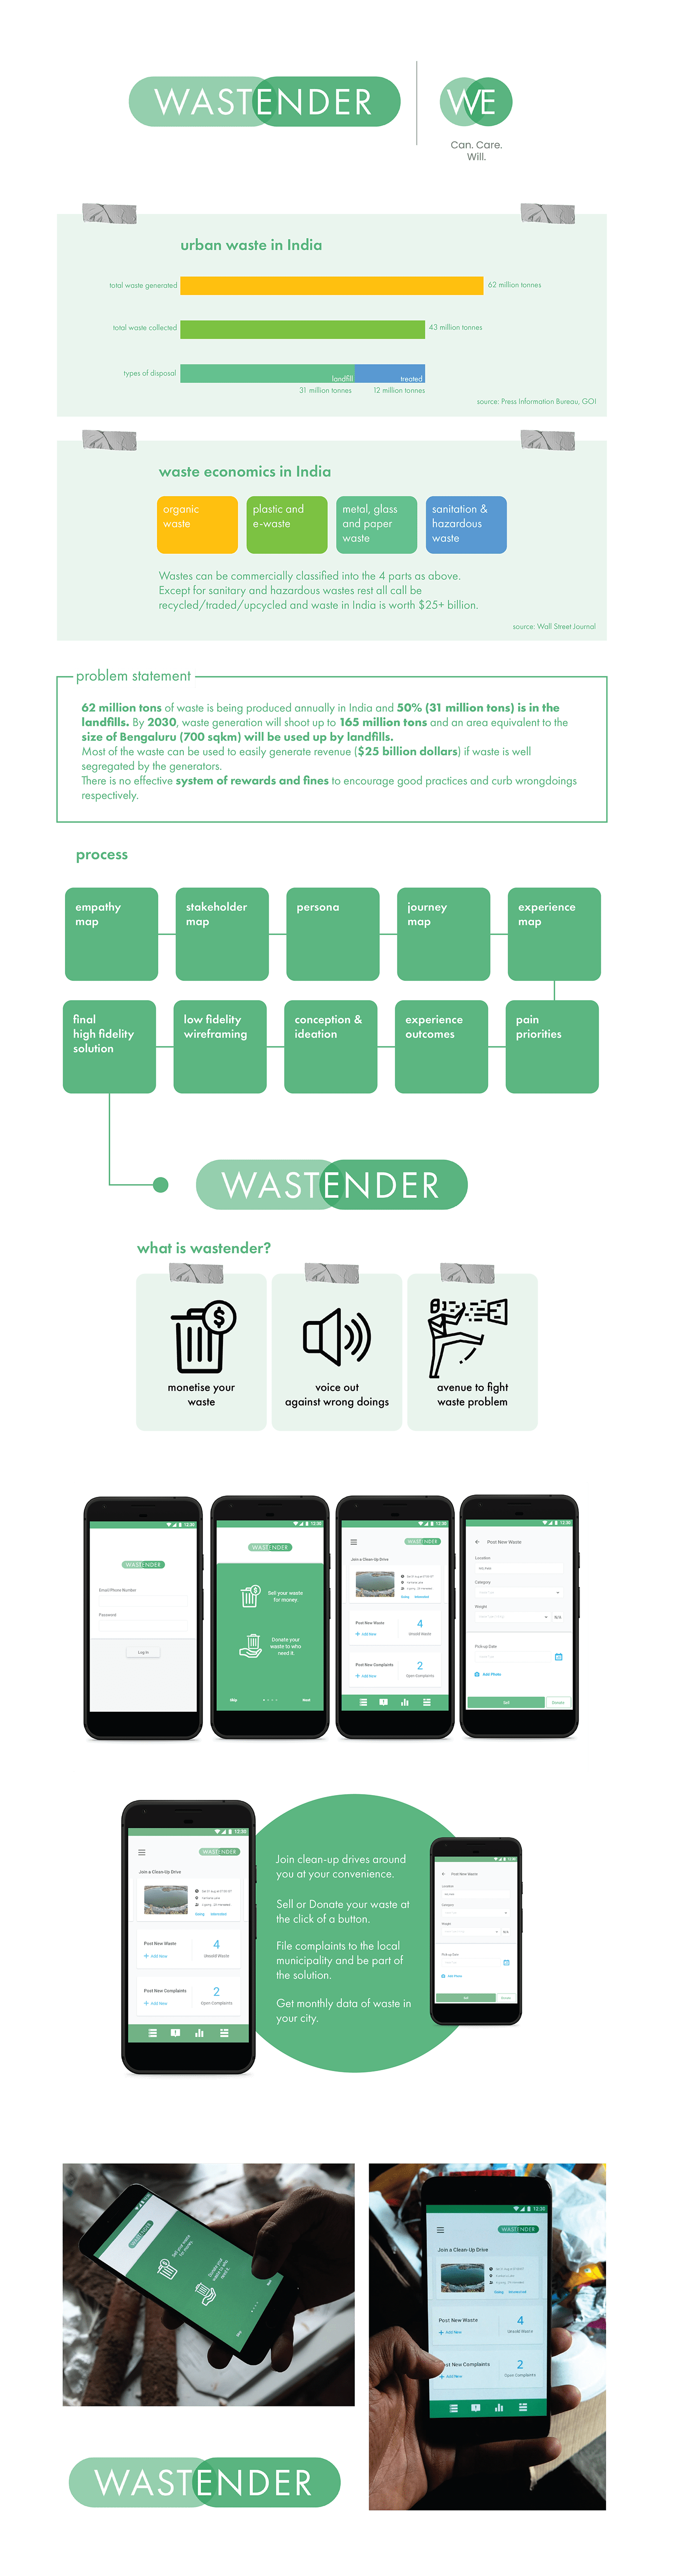 experience design Sustainability UI/UX user experience user interface waste management